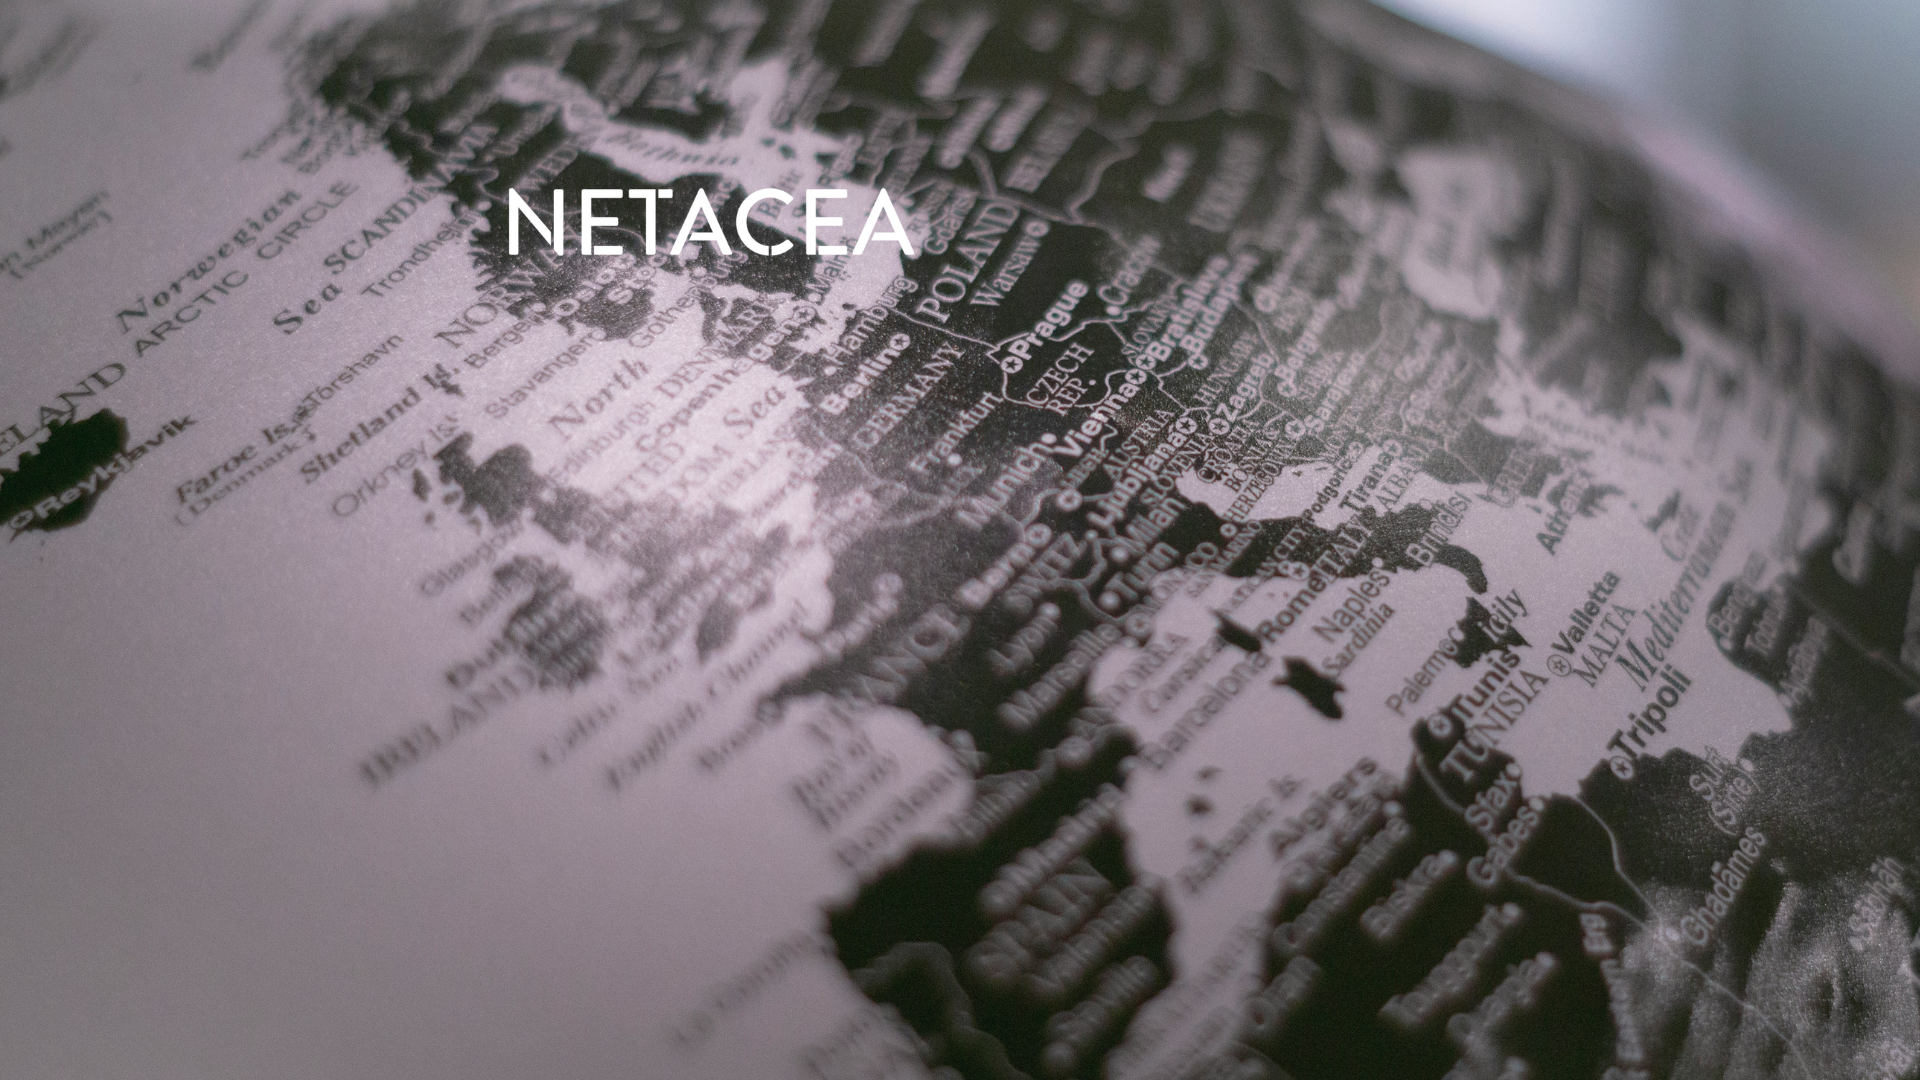 Putting Netacea on the map